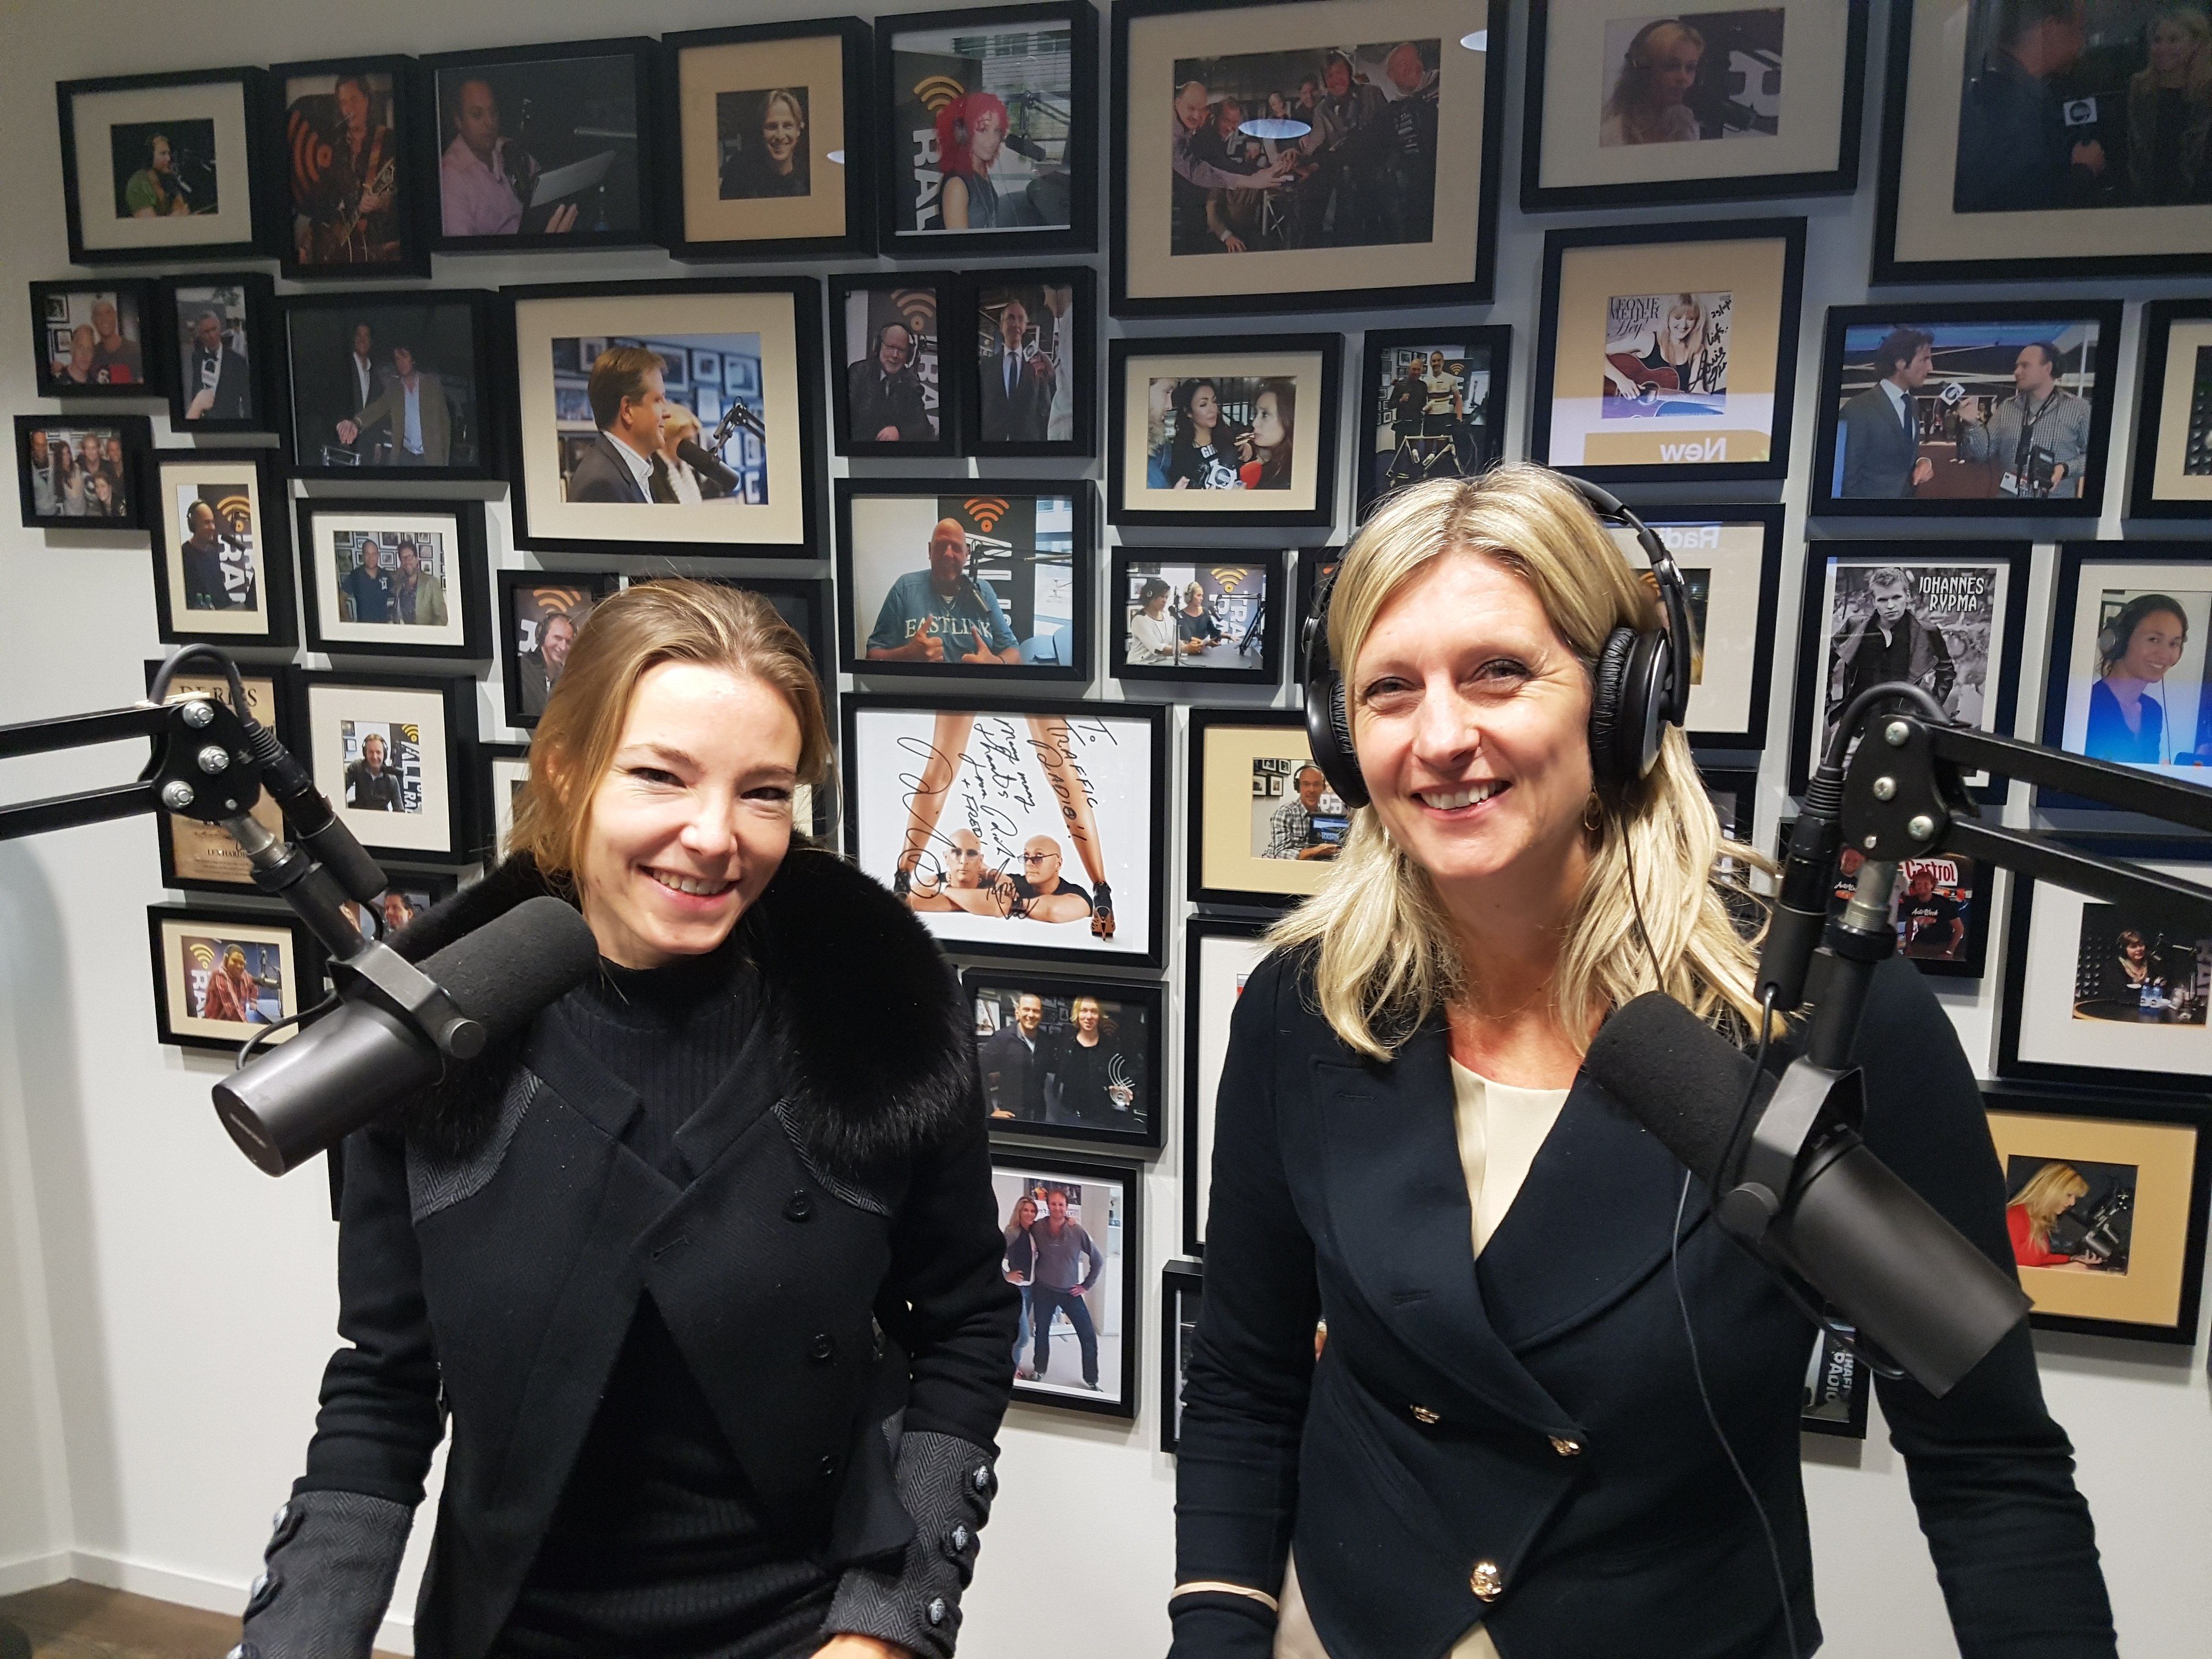 Mireille Lousberg, lawyer at Richard Korver Advocaten, is a guest at Vallen get up and continue with Jacqueline Zuidweg on New Business Radio. They discuss the subject of legal complications among entrepreneurs.